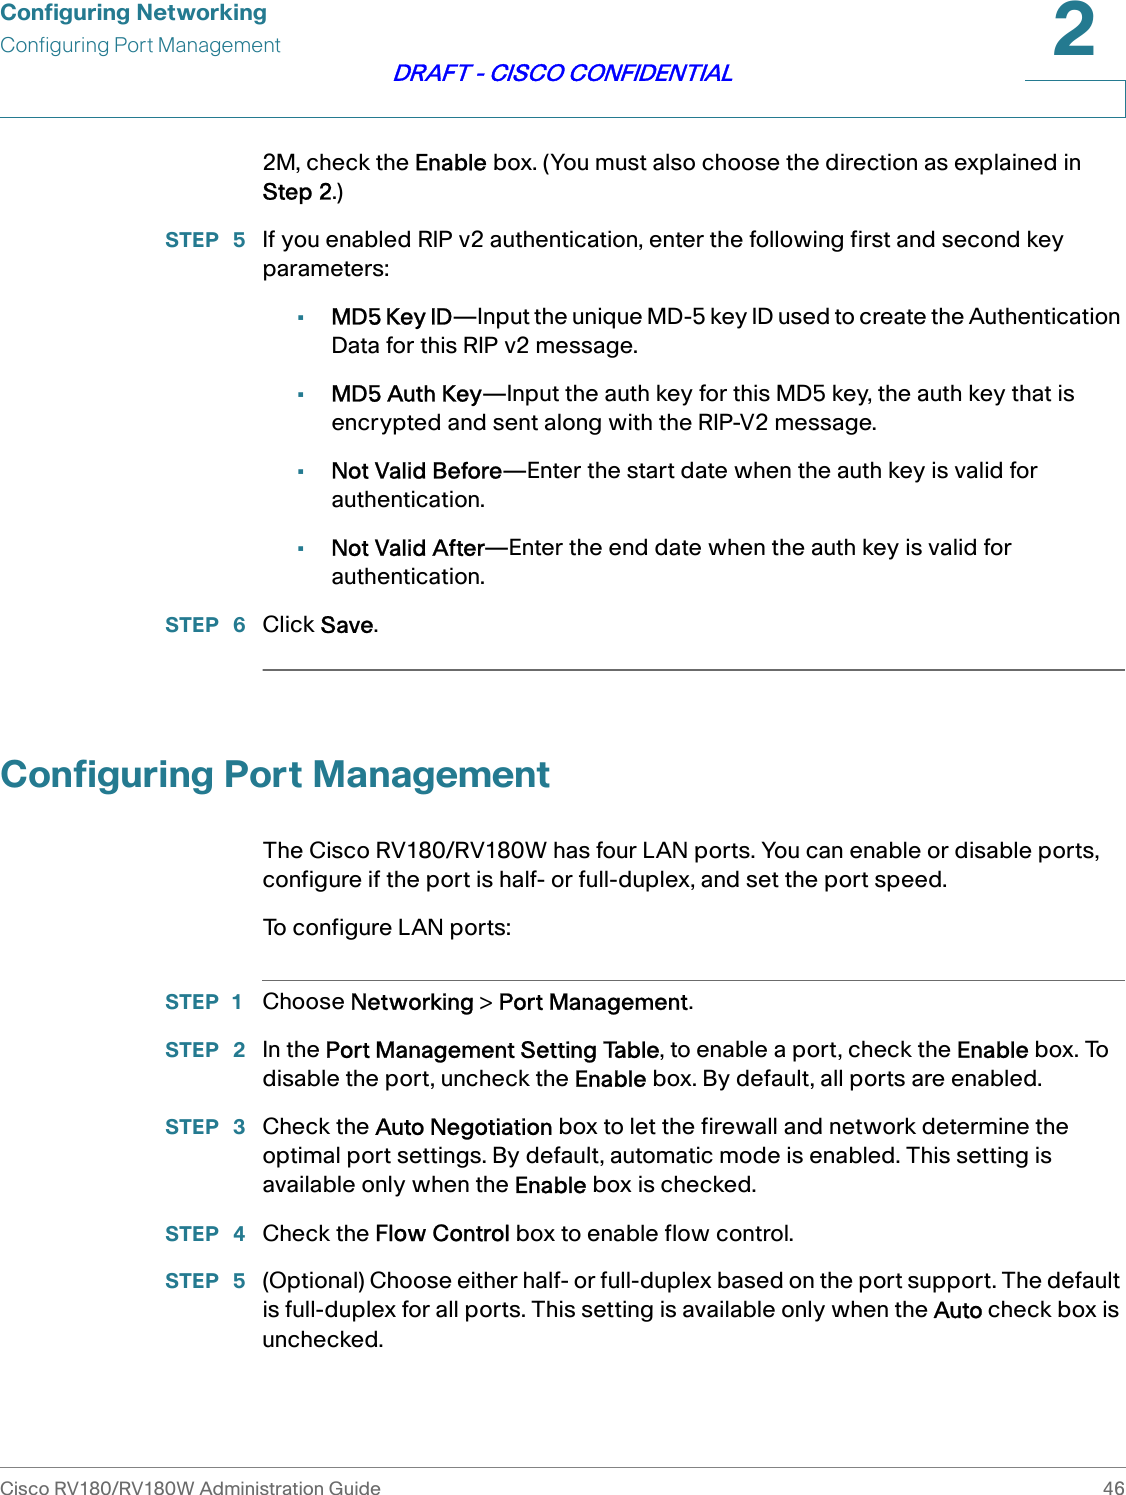 Configuring NetworkingConfiguring Port ManagementCisco RV180/RV180W Administration Guide 462DRAFT - CISCO CONFIDENTIAL2M, check the Enable box. (You must also choose the direction as explained in Step 2.)STEP  5 If you enabled RIP v2 authentication, enter the following first and second key parameters:•MD5 Key ID—Input the unique MD-5 key ID used to create the Authentication Data for this RIP v2 message.•MD5 Auth Key—Input the auth key for this MD5 key, the auth key that is encrypted and sent along with the RIP-V2 message.•Not Valid Before—Enter the start date when the auth key is valid for authentication.•Not Valid After—Enter the end date when the auth key is valid for authentication.STEP  6 Click Save. Configuring Port ManagementThe Cisco RV180/RV180W has four LAN ports. You can enable or disable ports, configure if the port is half- or full-duplex, and set the port speed.To configure LAN ports:STEP 1 Choose Networking &gt; Port Management.STEP  2 In the Port Management Setting Table, to enable a port, check the Enable box. To disable the port, uncheck the Enable box. By default, all ports are enabled. STEP  3 Check the Auto Negotiation box to let the firewall and network determine the optimal port settings. By default, automatic mode is enabled. This setting is available only when the Enable box is checked.STEP  4 Check the Flow Control box to enable flow control.STEP  5 (Optional) Choose either half- or full-duplex based on the port support. The default is full-duplex for all ports. This setting is available only when the Auto check box is unchecked.